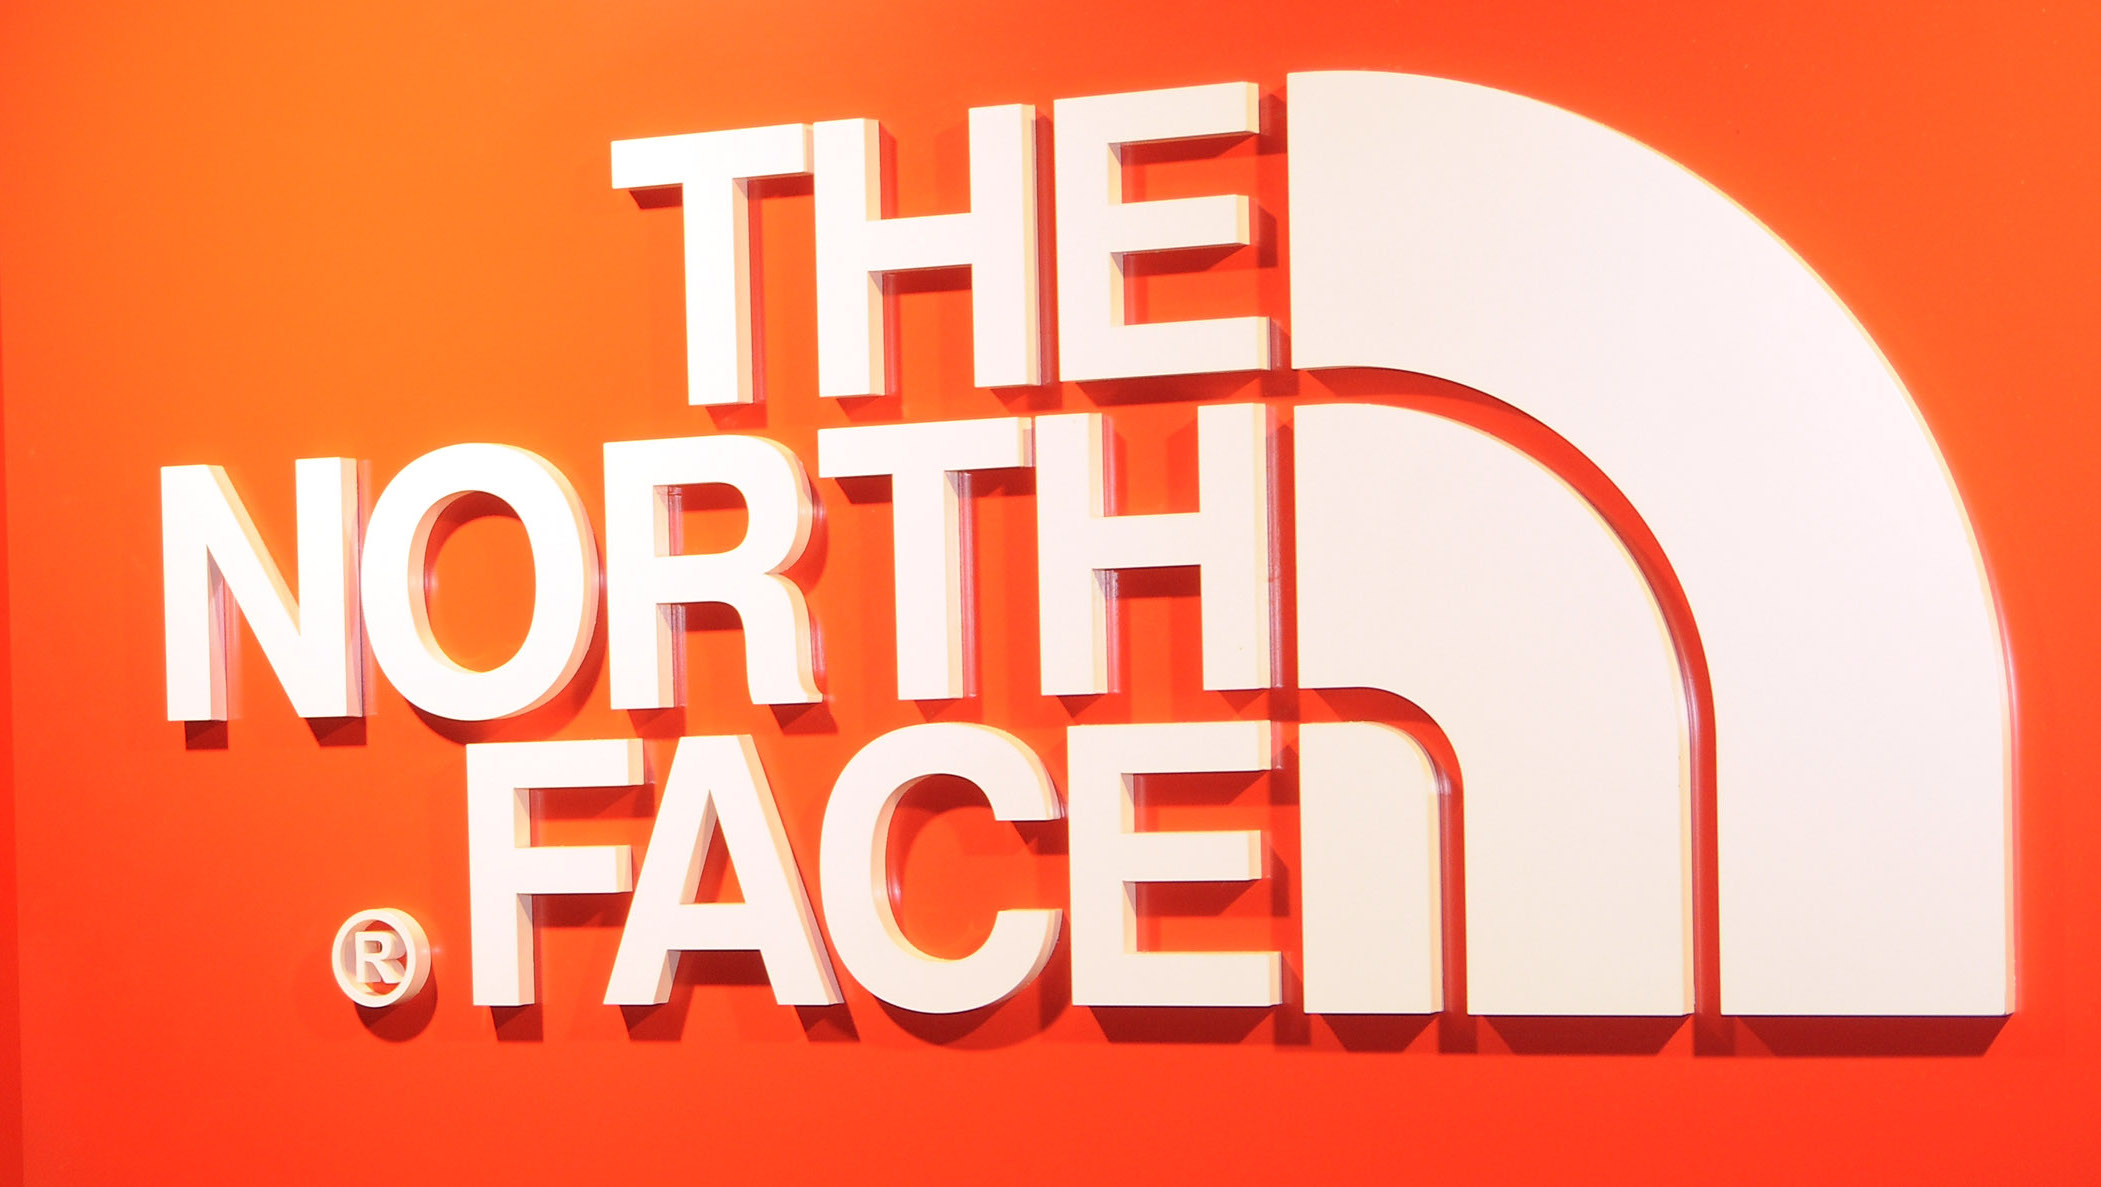 North Face launches “Summer of Pride” with drag video amidst Bud Light and Target controversy.